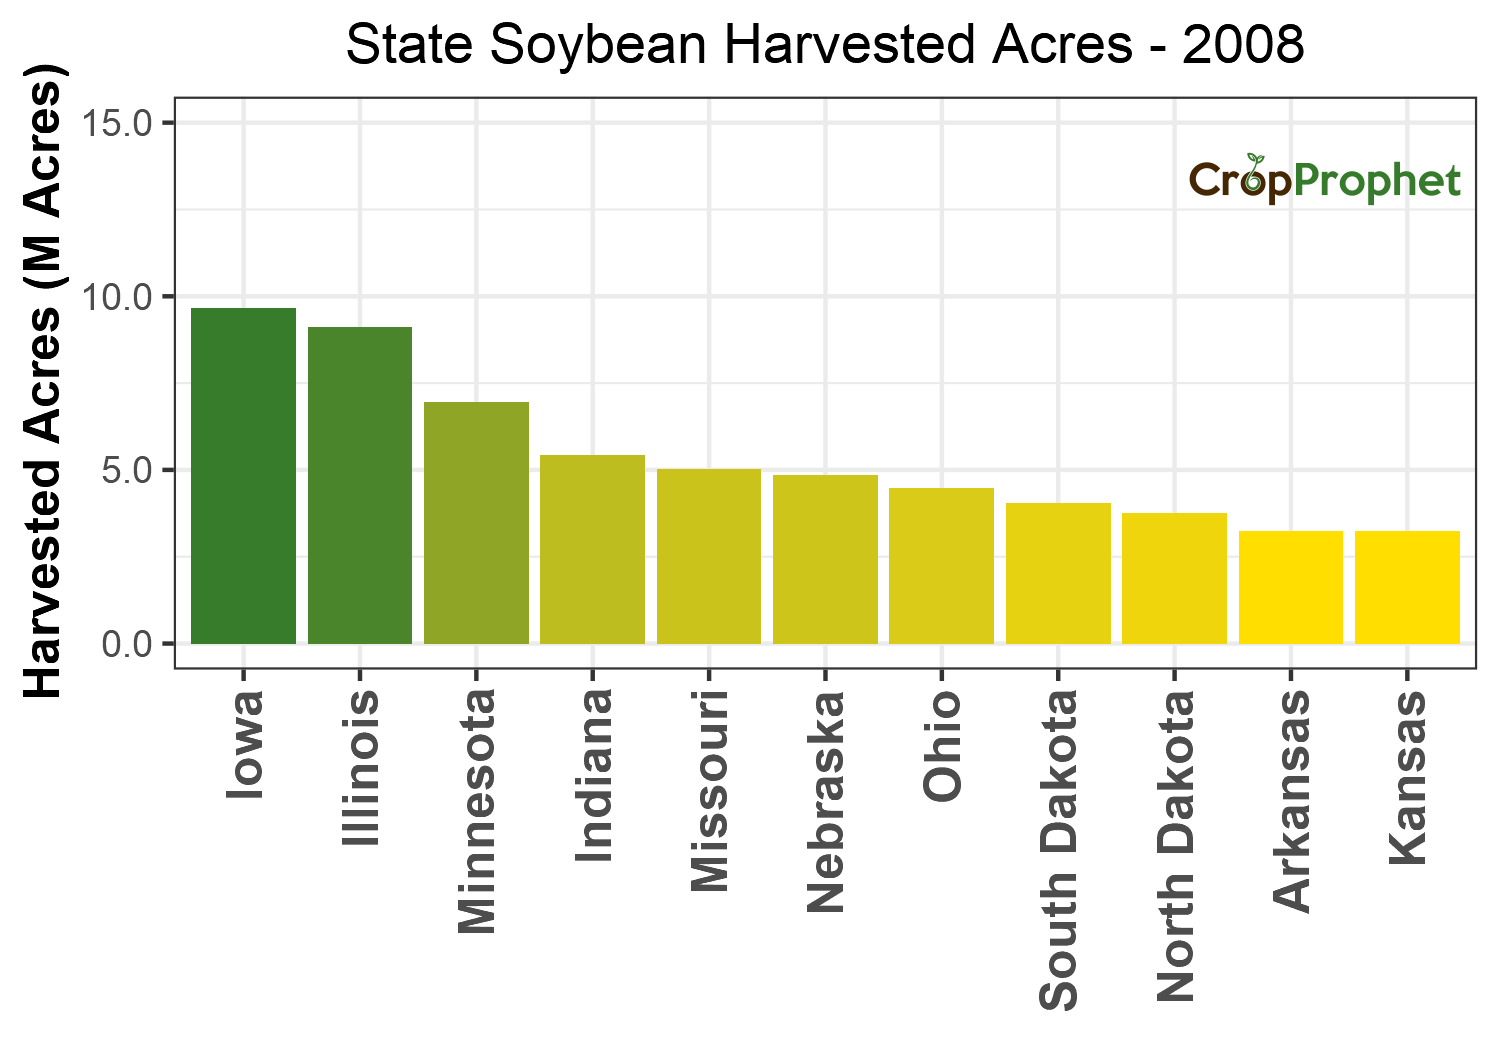 Soybean Harvested Acres by State - 2008 Rankings